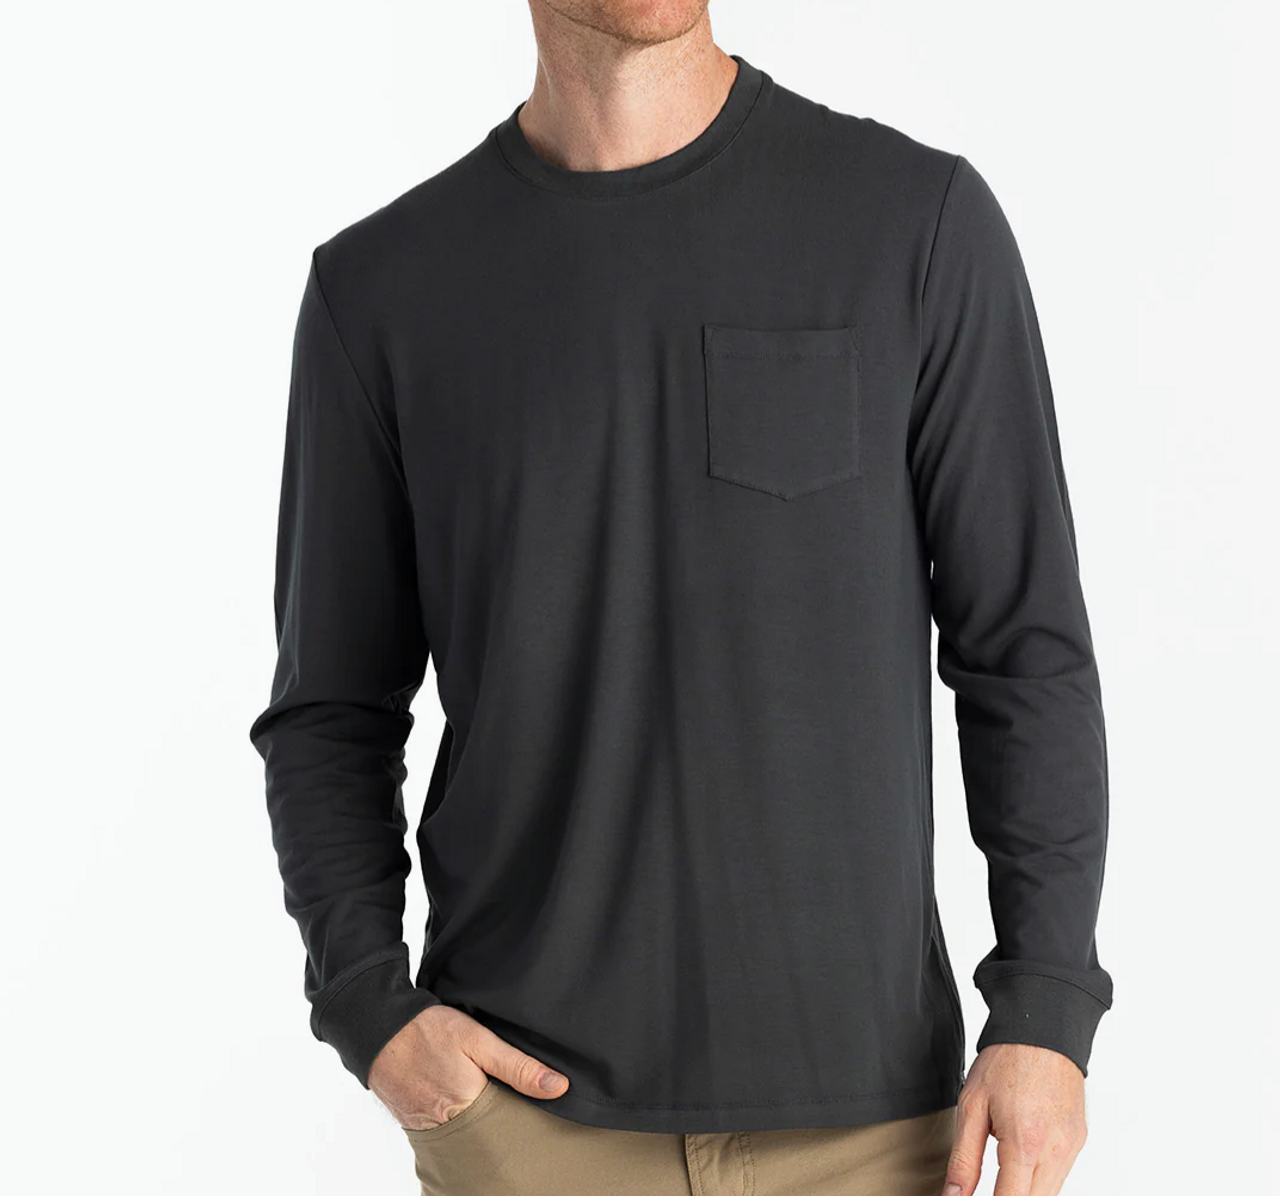 https://cdn11.bigcommerce.com/s-gxthzko3a6/images/stencil/1280x1280/products/44741/57858/free-fly-mens-flex-long-sleeve-pocket-tee-black-sand__17120.1696445082.png?c=1